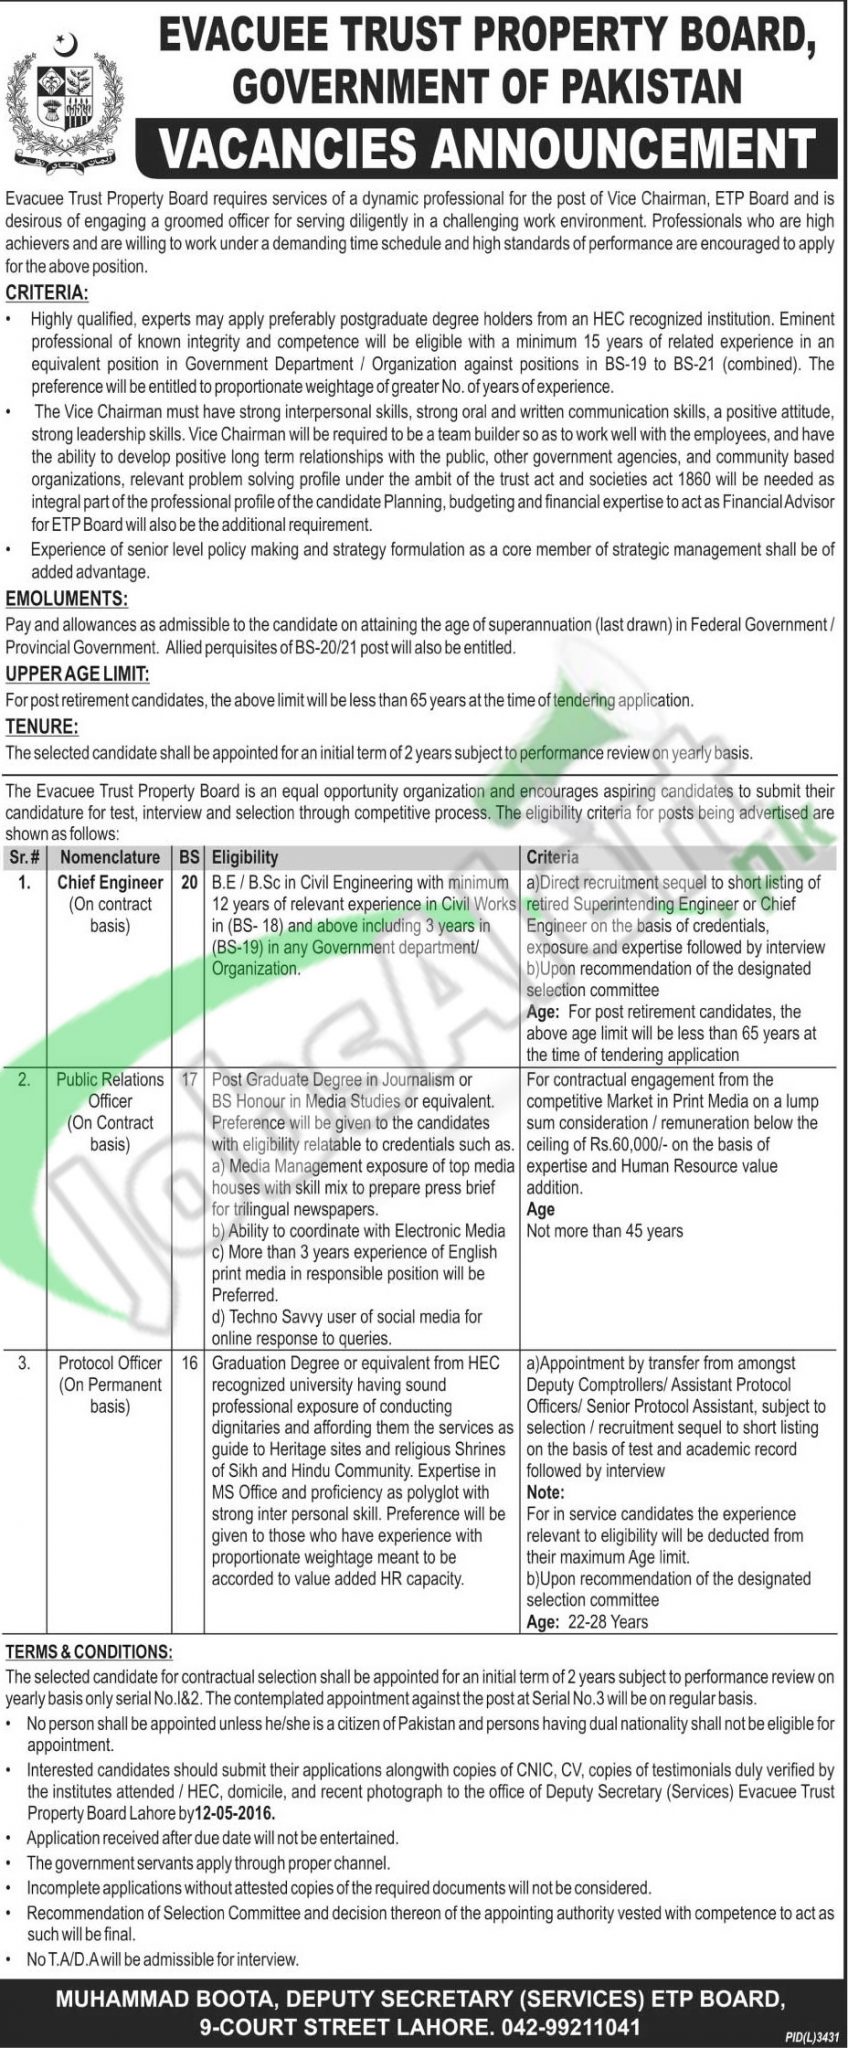 Situations Vacant in Evacuee Trust Property Board April 2016 Govt of Pakistan Career Offers